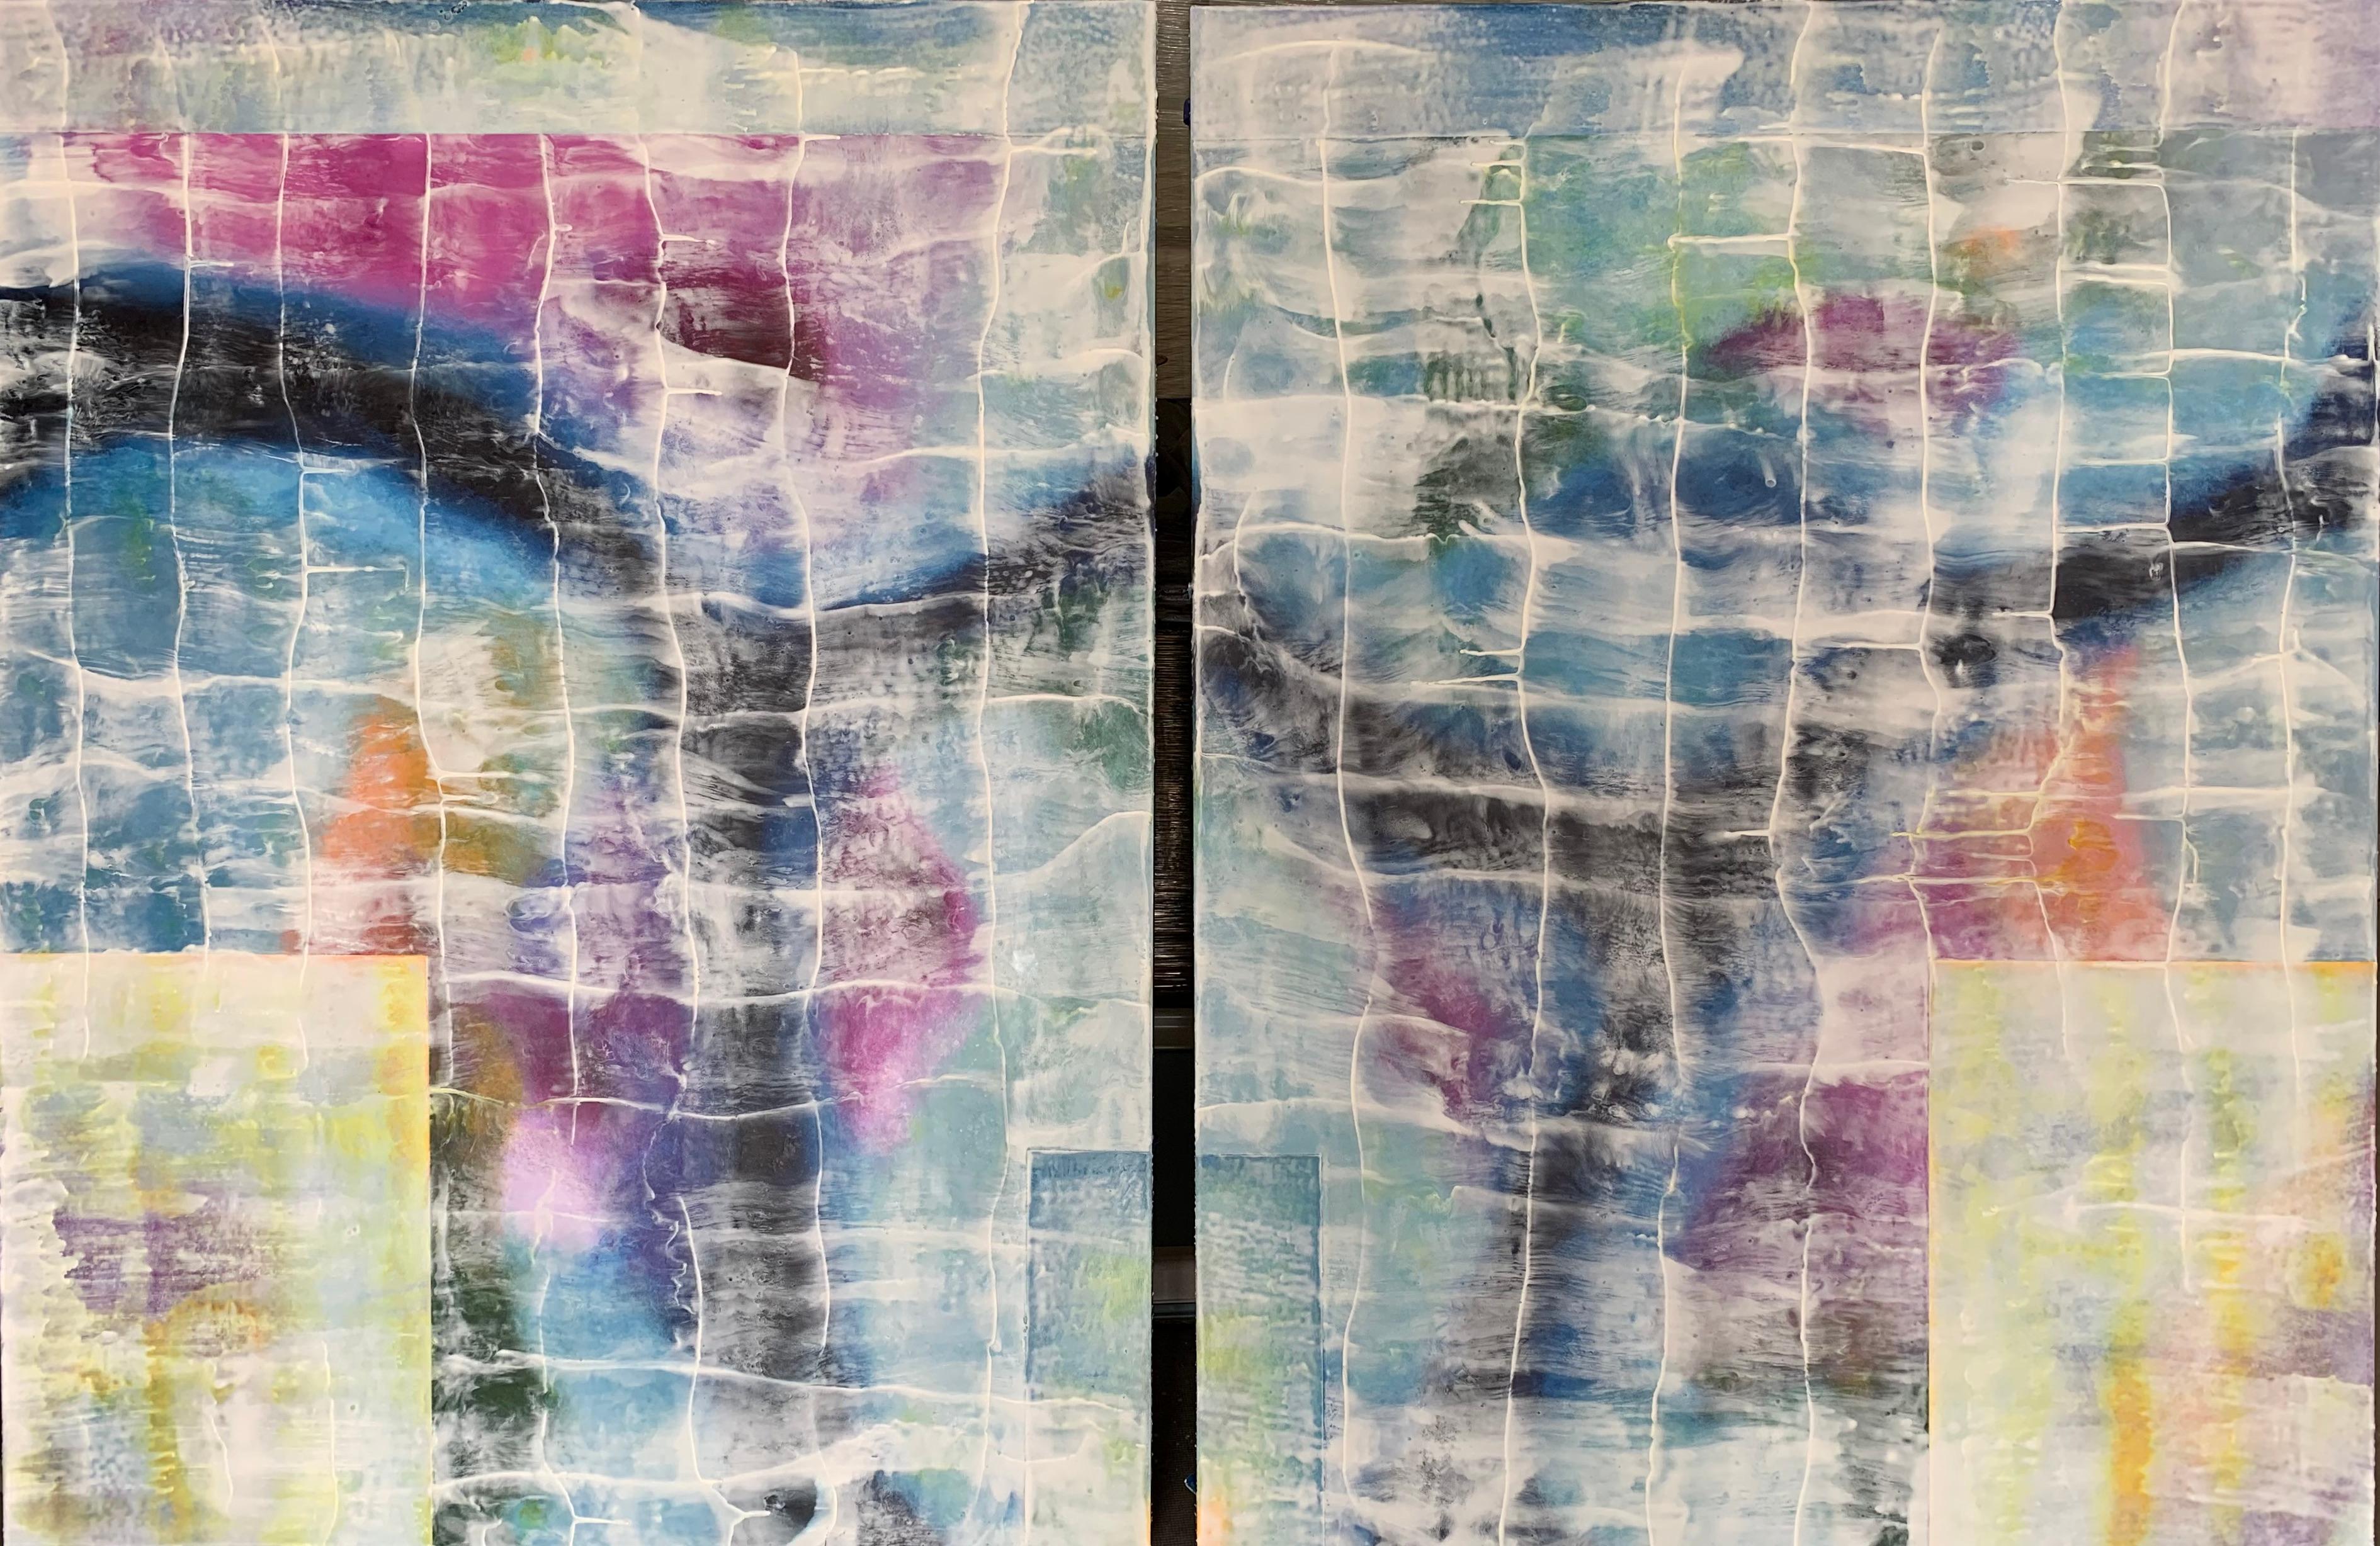 1/1, oil and encaustic

Size: 36x48 (2 panels)

In Andrea’s diptych, CONVERGENCE, the canvas is dominated in dreamy haze of blues, golds and purples. These colors blend together the same way shadows and light give the illusion of opening one’s eyes